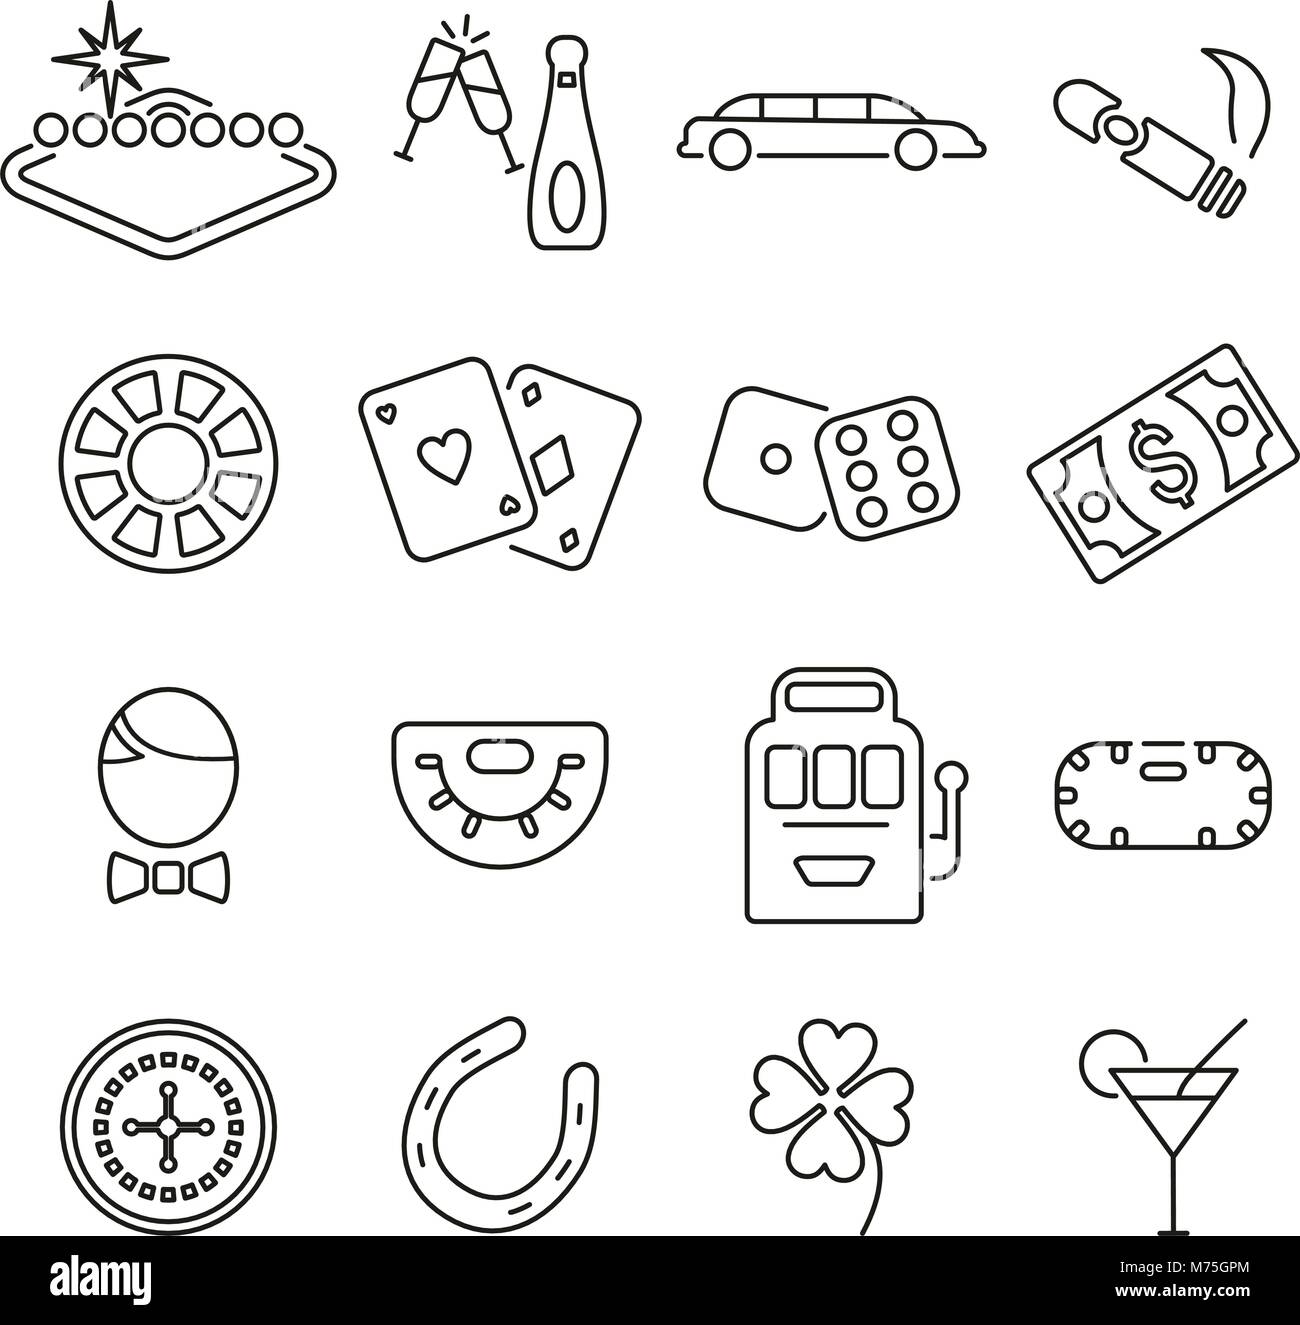 Las Vegas City & Culture or Gambling Icons Thin Line Vector Illustration Set Stock Vector